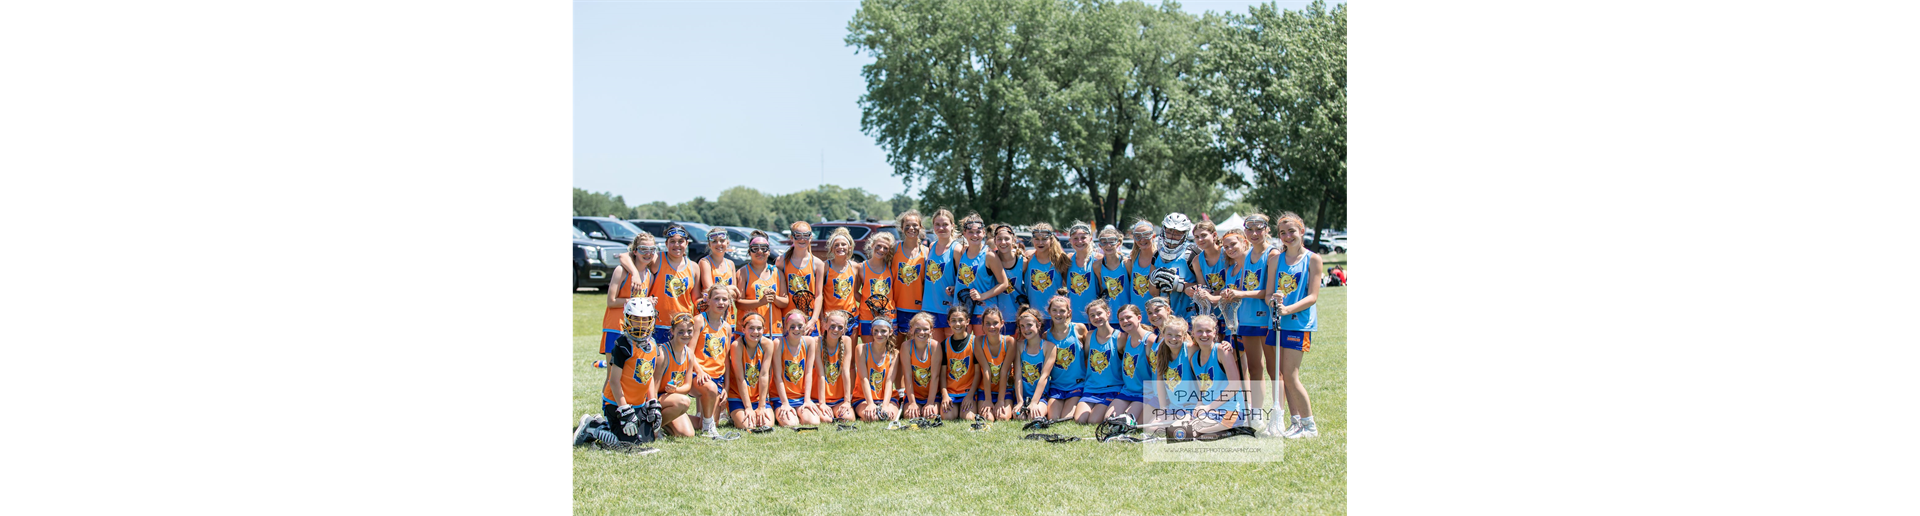 Sisters of SOGO (27/28's and 2026's) All Smiles in Wisconsin